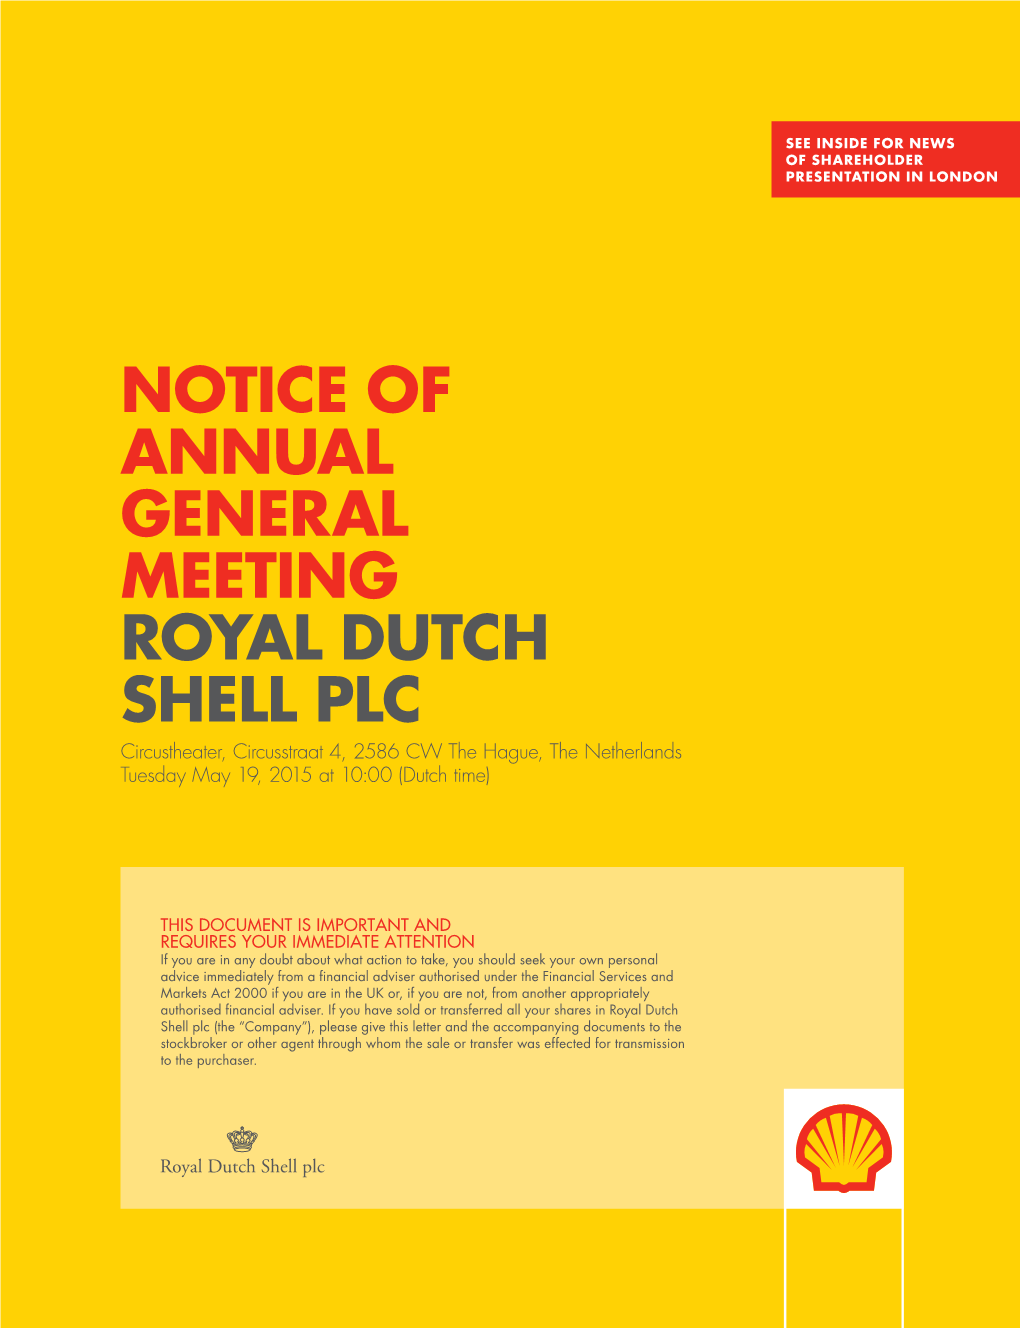 NOTICE of ANNUAL GENERAL MEETING ROYAL DUTCH SHELL PLC Circustheater, Circusstraat 4, 2586 CW the Hague, the Netherlands Tuesday May 19, 2015 at 10:00 (Dutch Time)